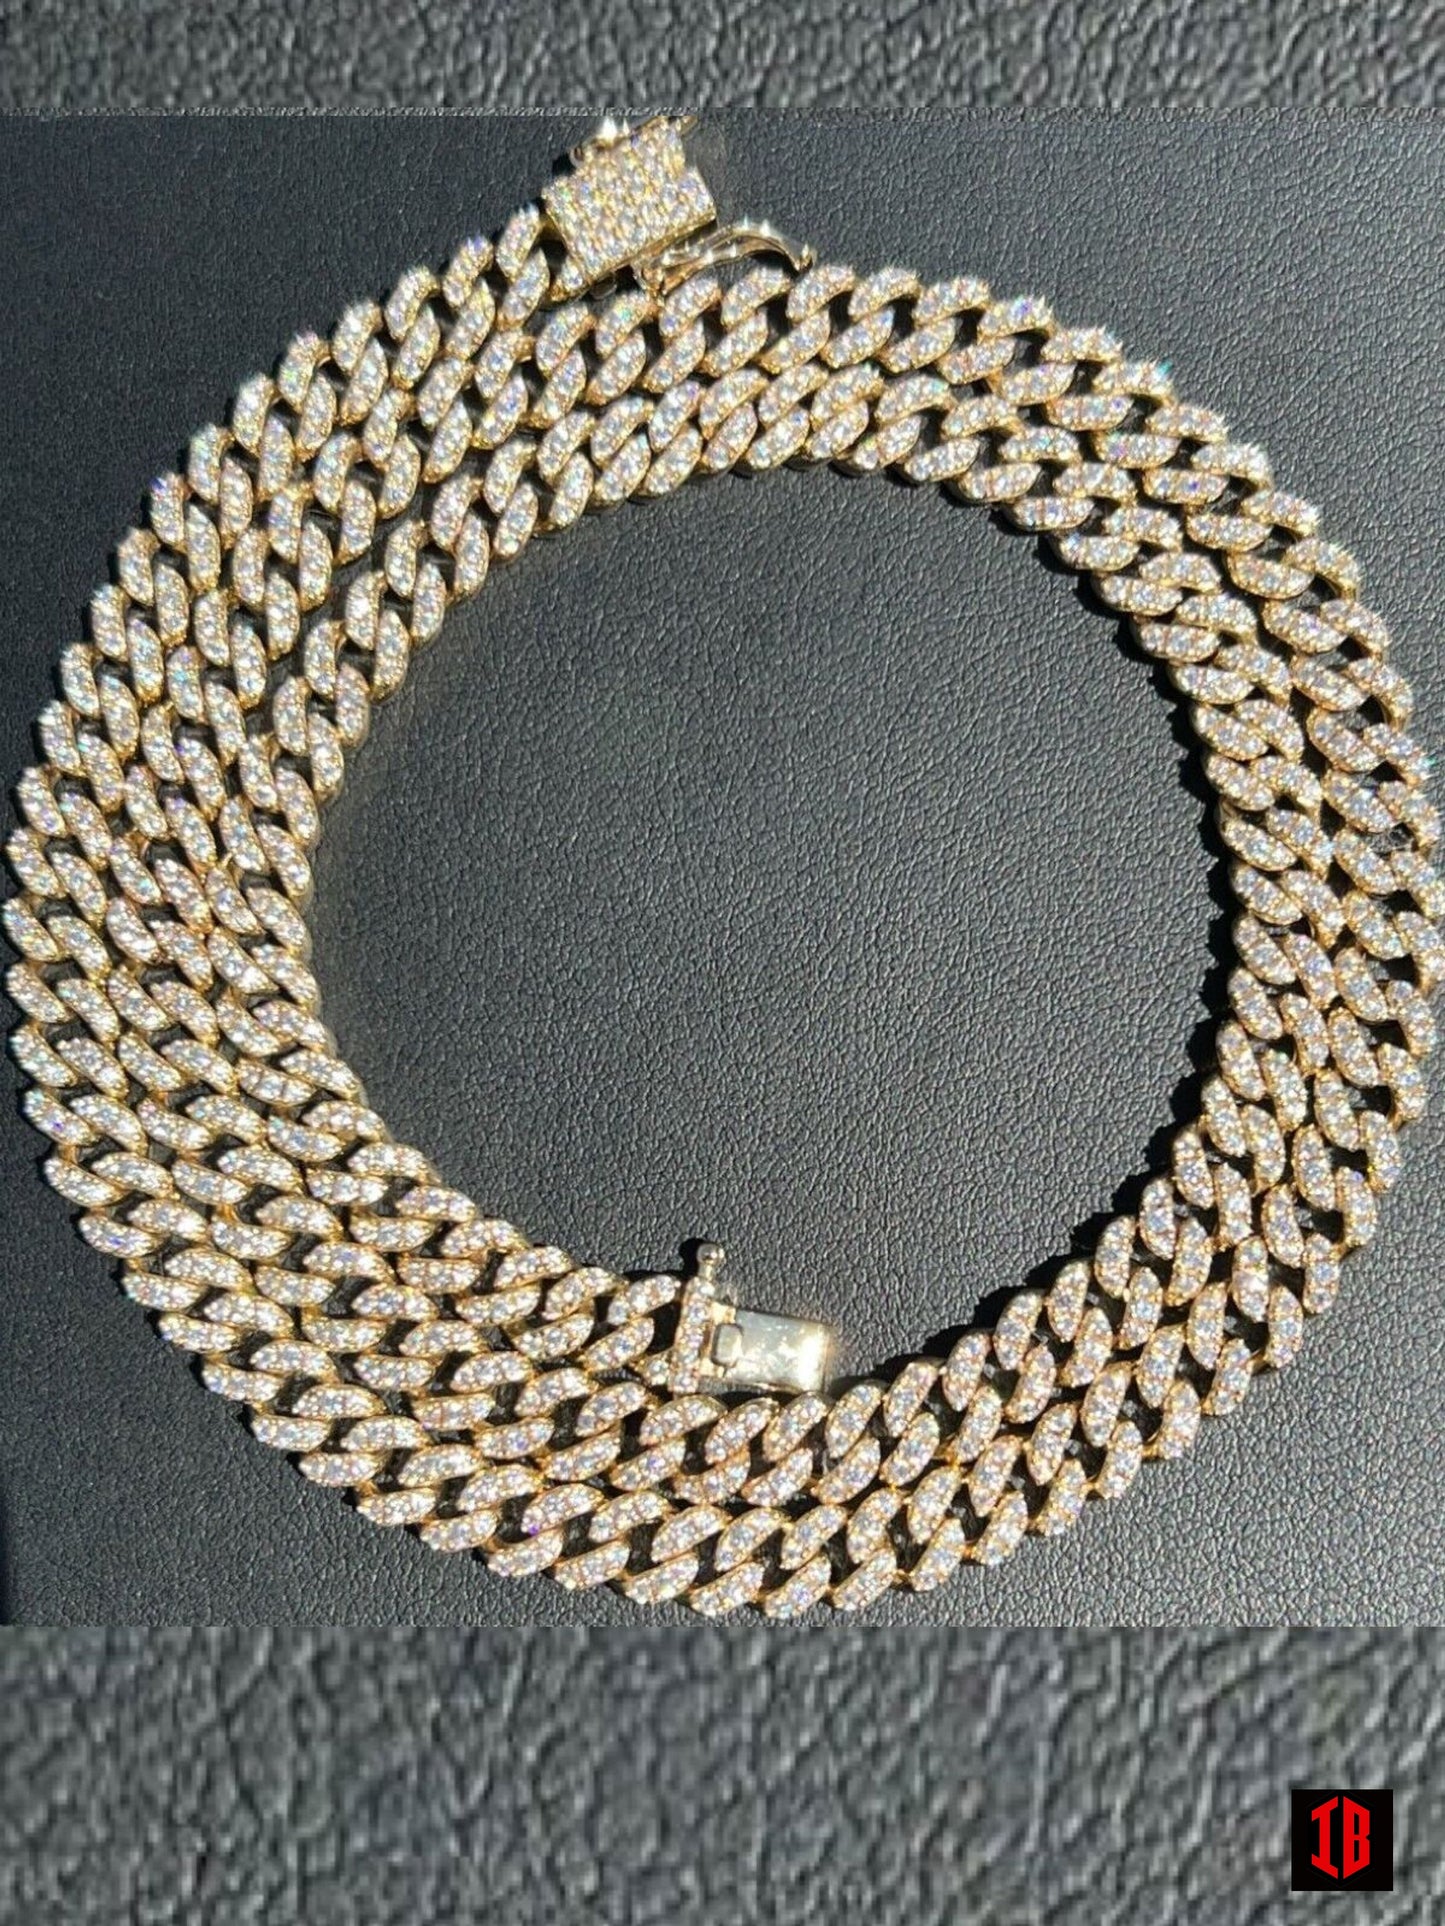 Real Diamond Solid 14k Yellow Gold Iced 6mm Miami Cuban Link Chain Necklace 6-8ct